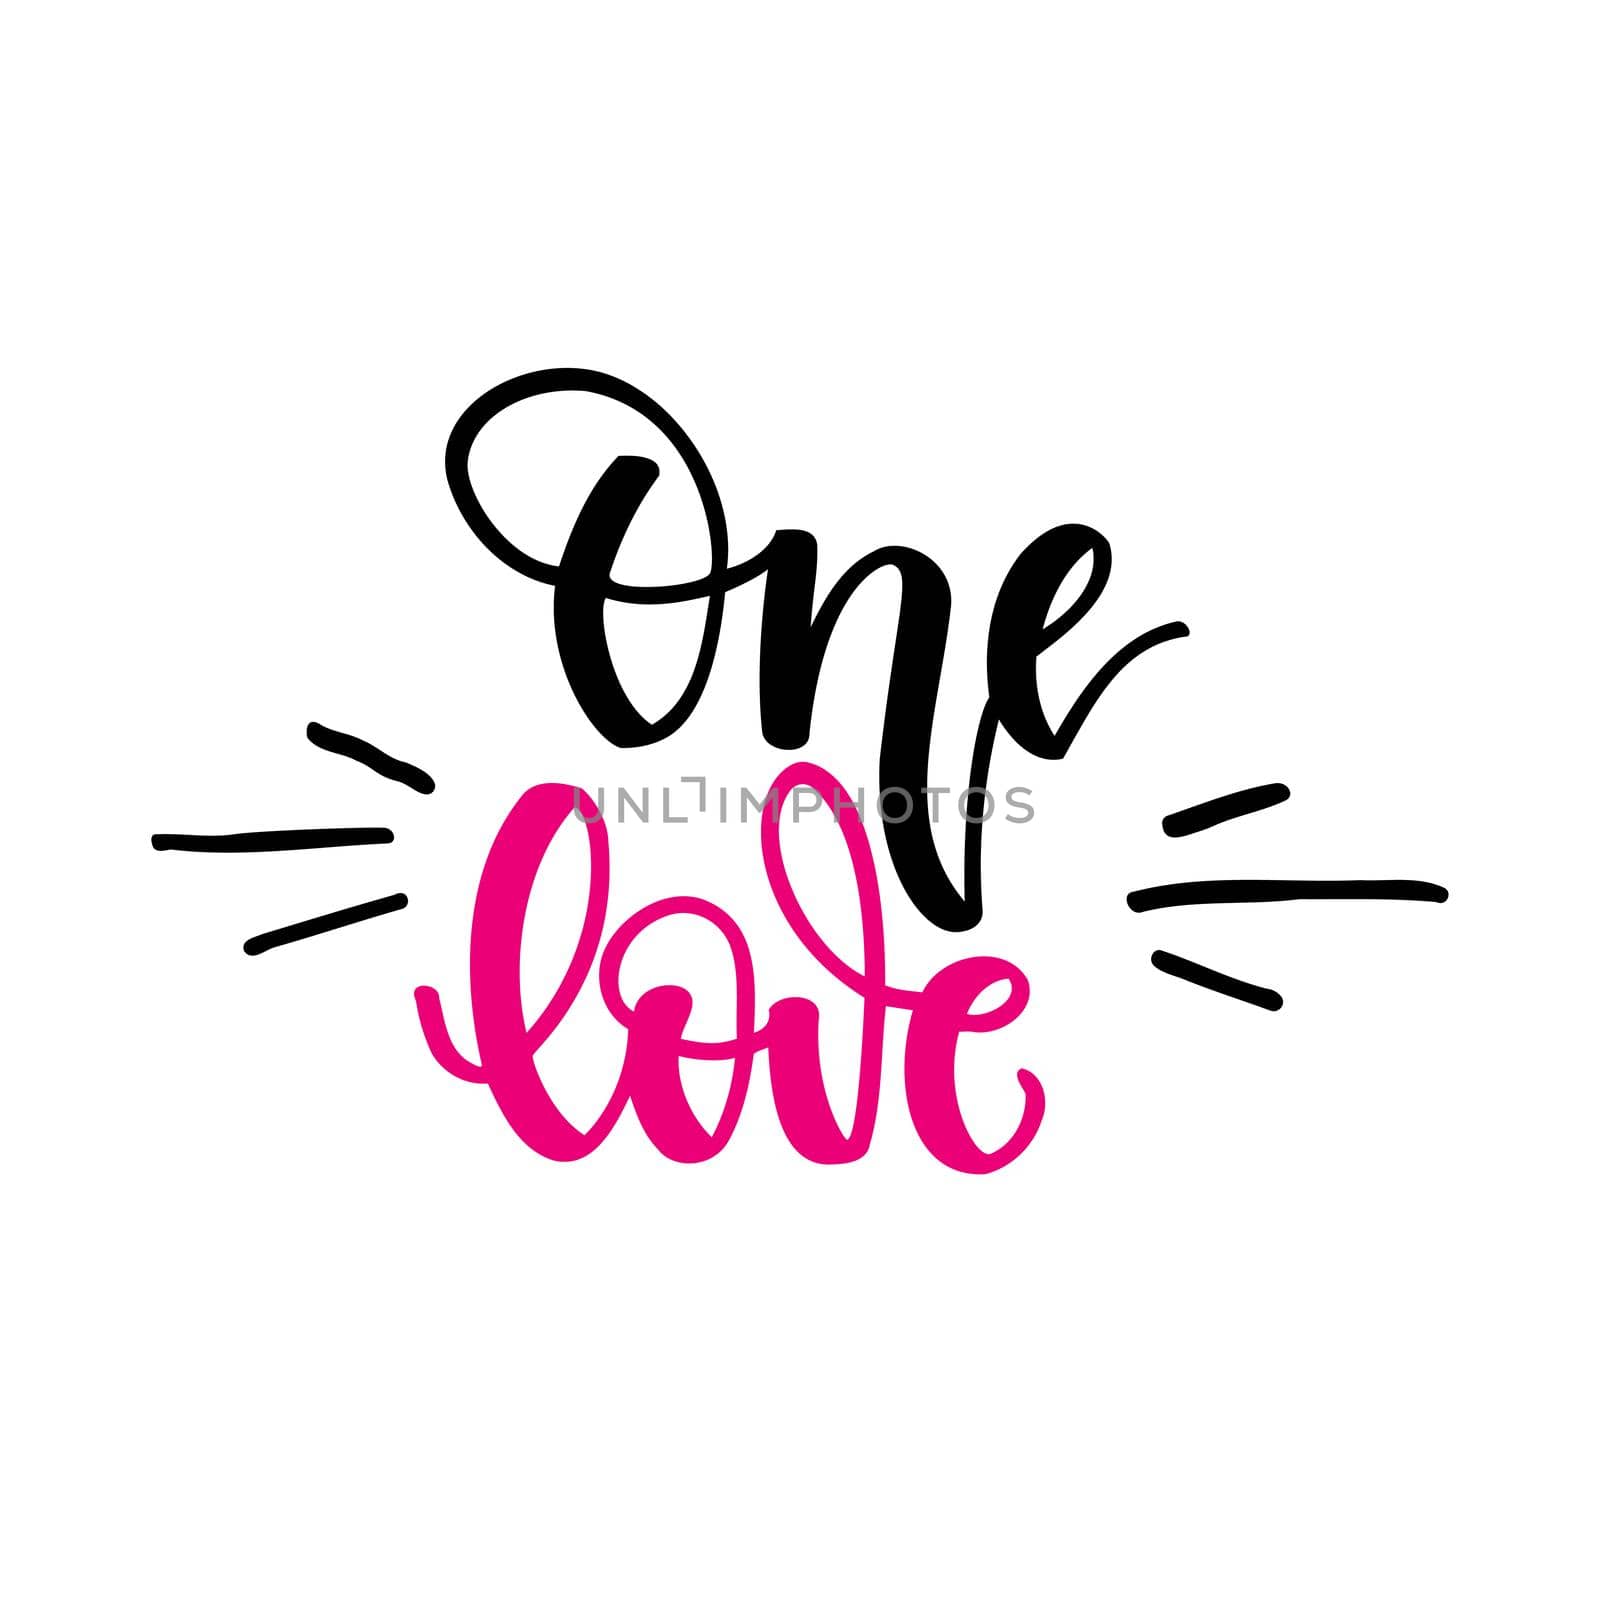 One love. Hand lettering isolated on white background. illustration for Valentines day greeting cards, posters, print on T-shirts and much more.